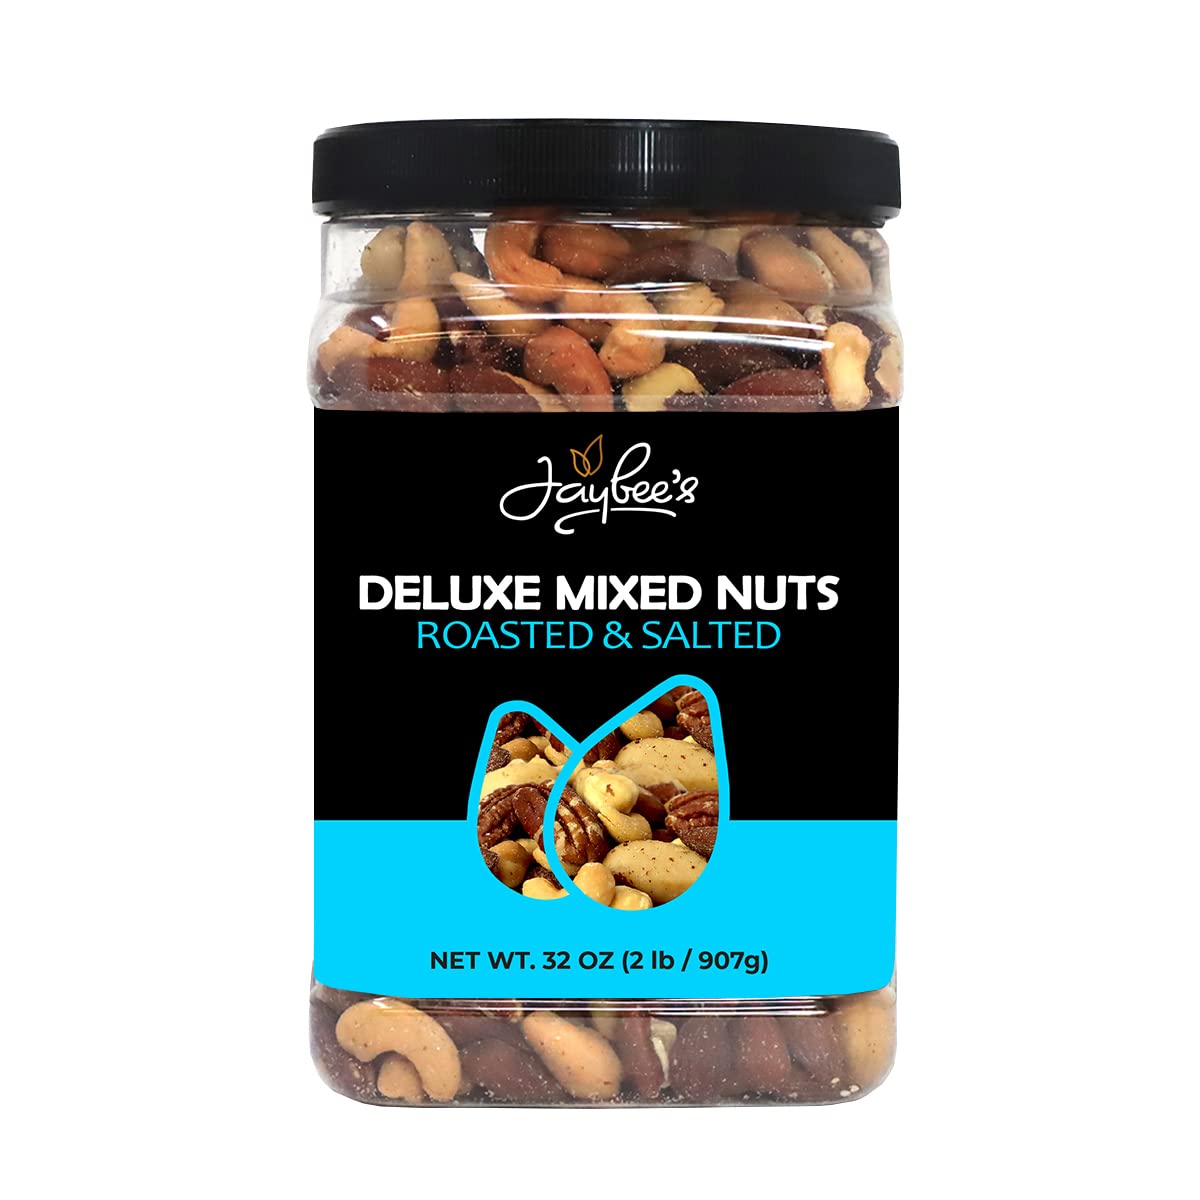 Mixed Nuts Deluxe - Roasted & Salted